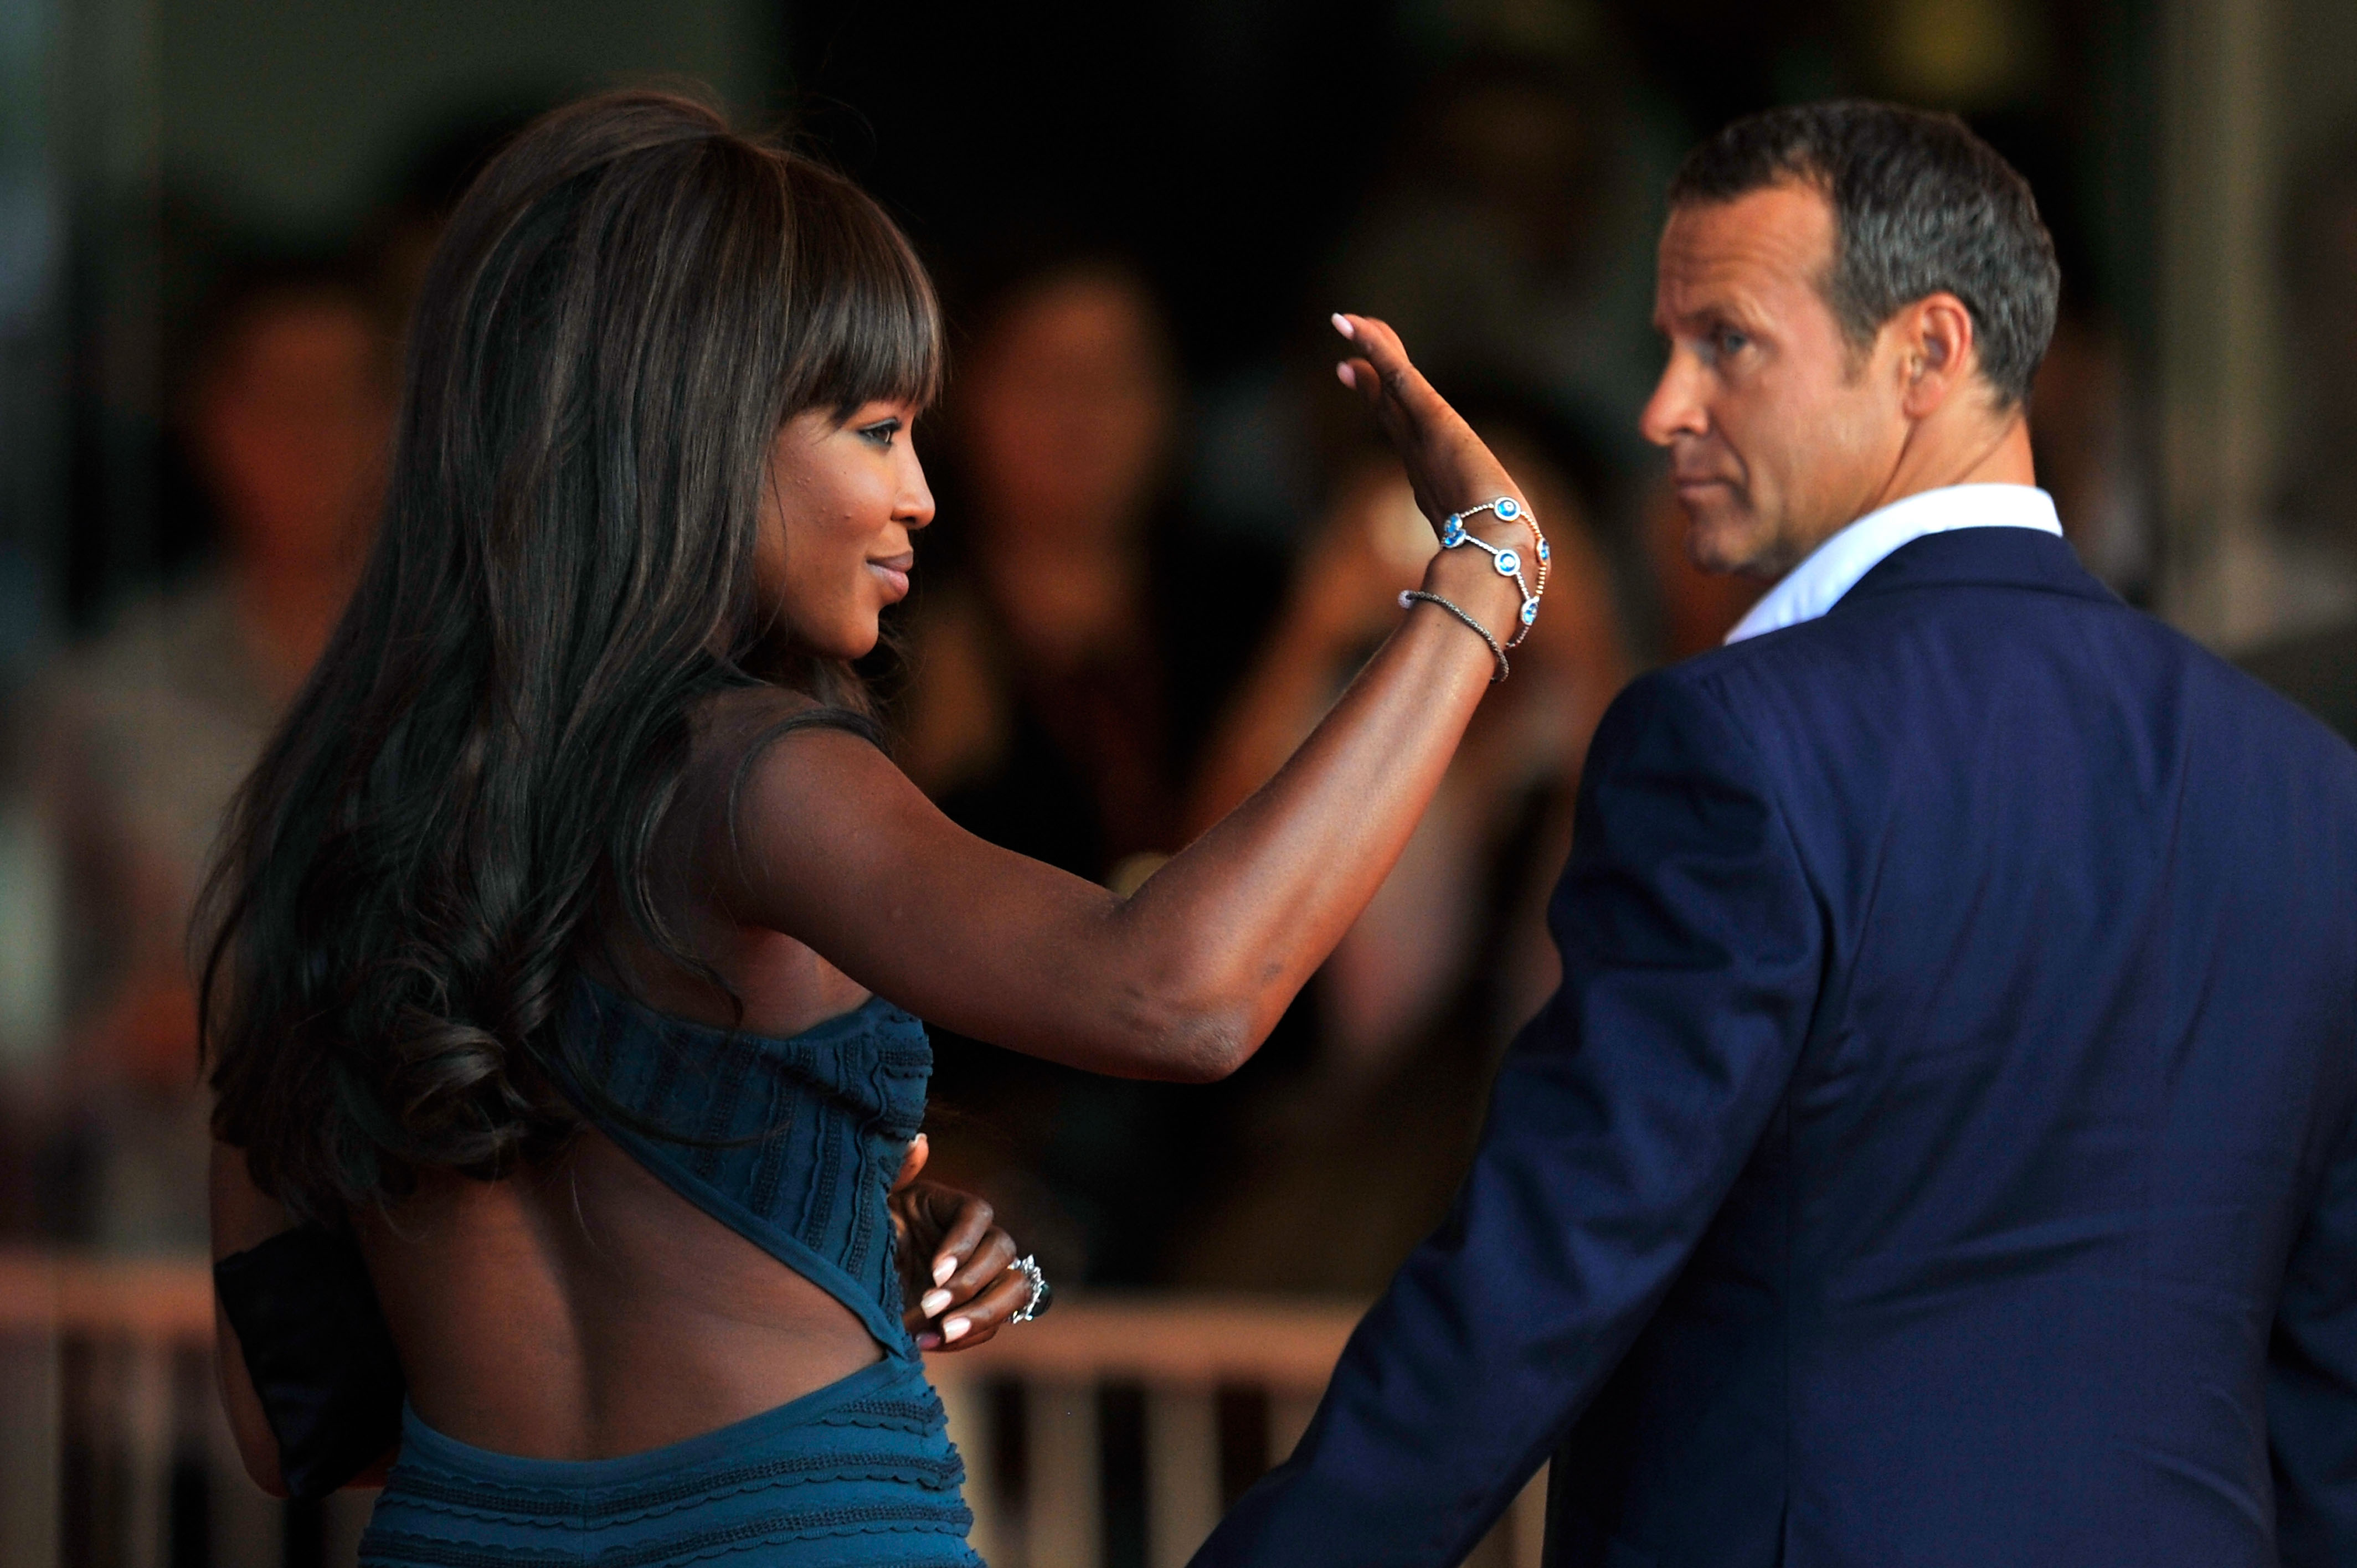 Naomi Campbell and Vladislav Doronin in Italy in 2010 | Source: Getty Images